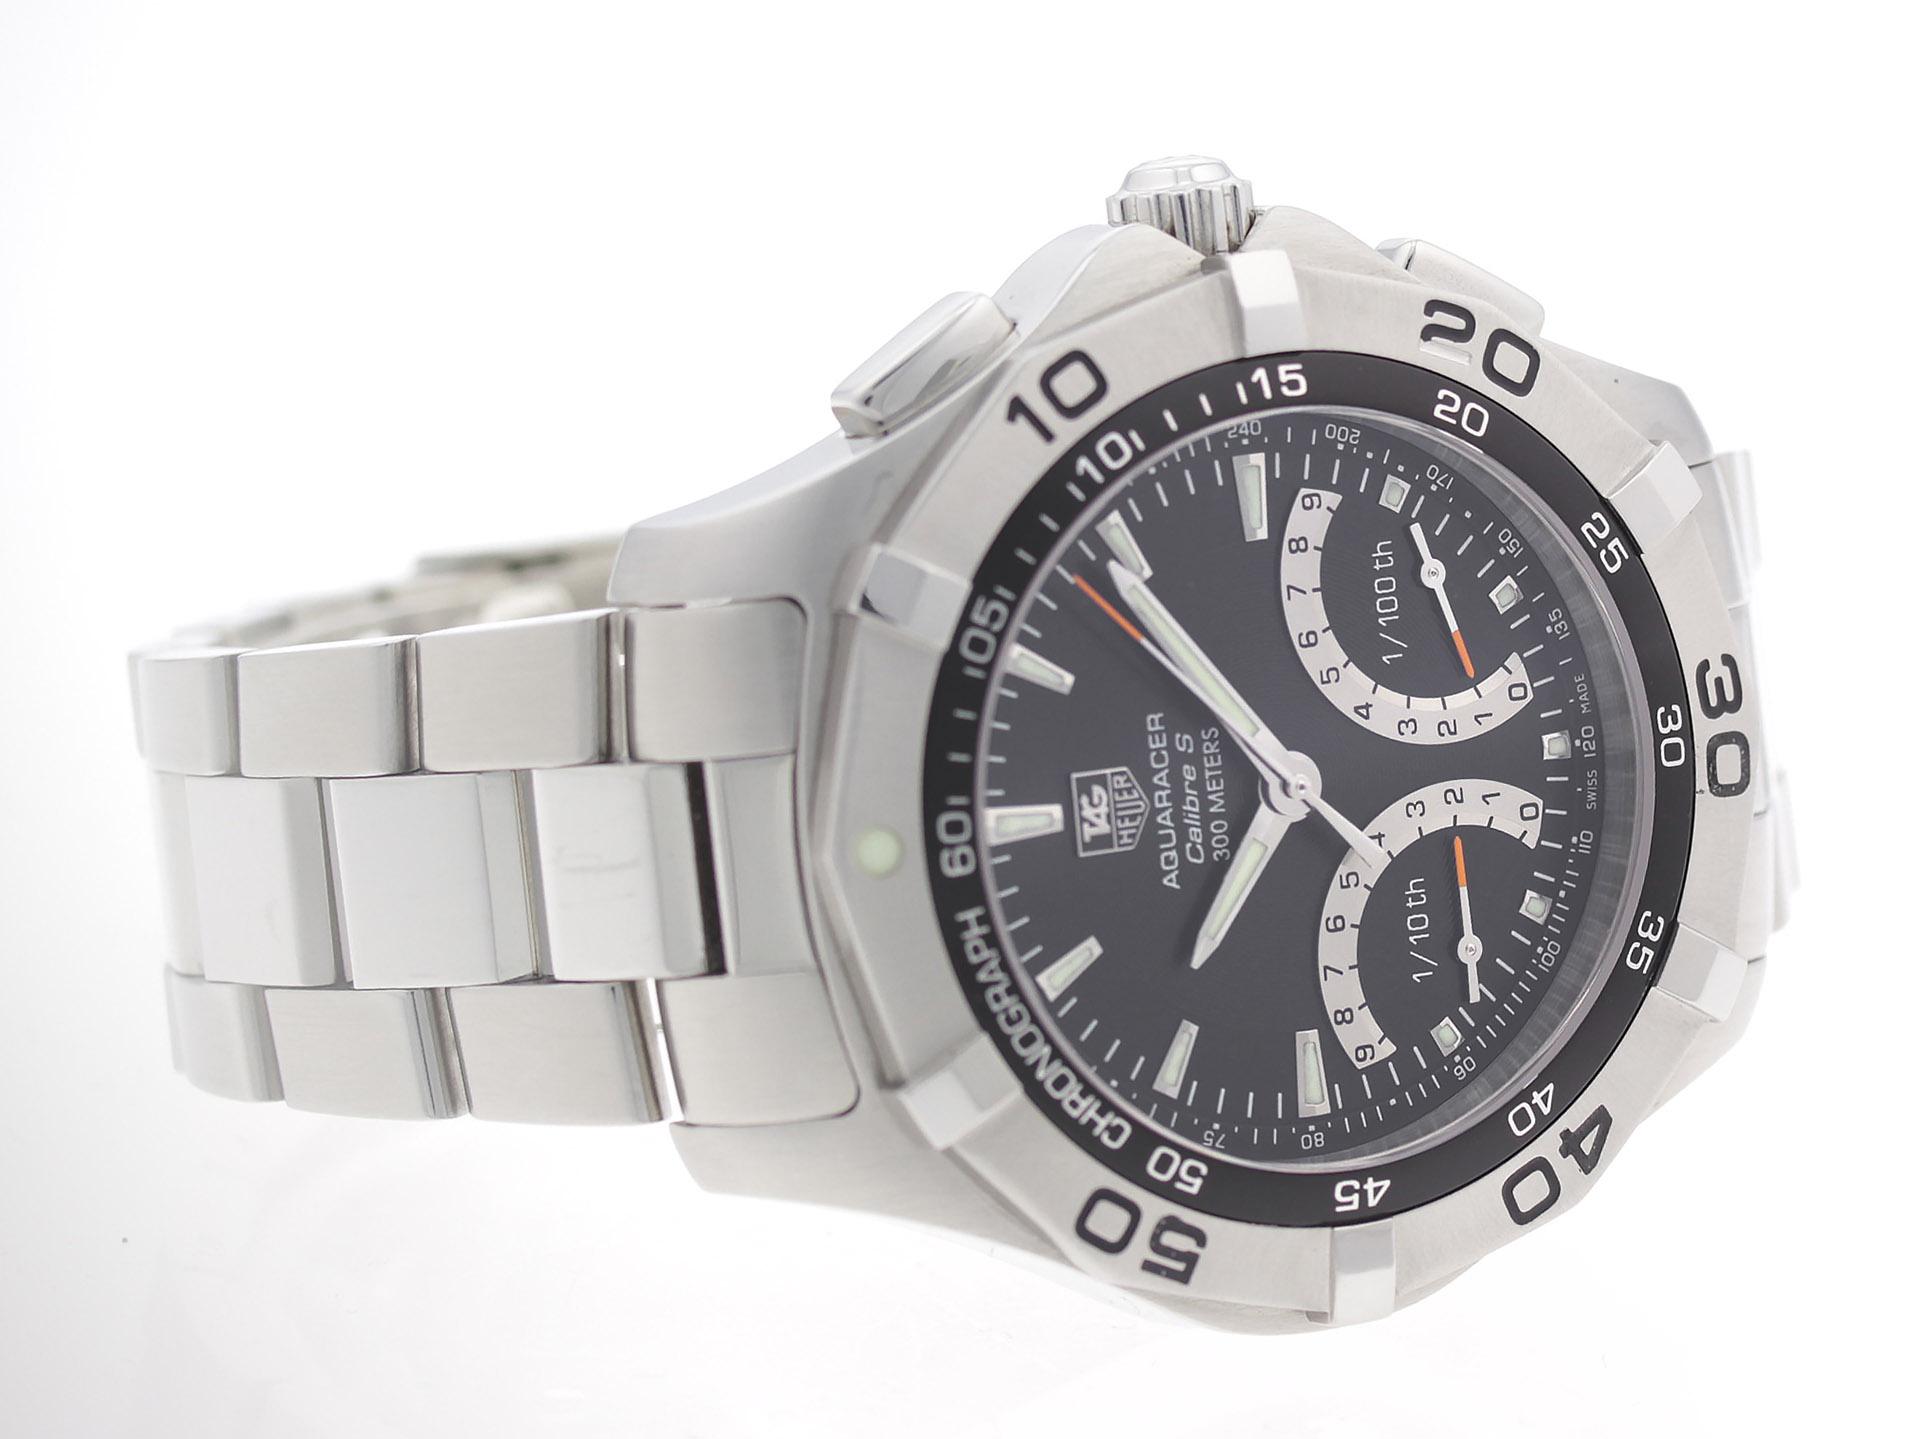 Stainless steel Tag Heuer Aquaracer CAF7010.BA0815 watch, chronograph, with tachymeter, regatta timer, and perpetual calendar.

Watch	
Brand:	TAG Heuer
Series:	Aquaracer
Model #:	CAF7010.BA0815
Gender:	Men’s
Condition:	Great Condition Pre-owned,